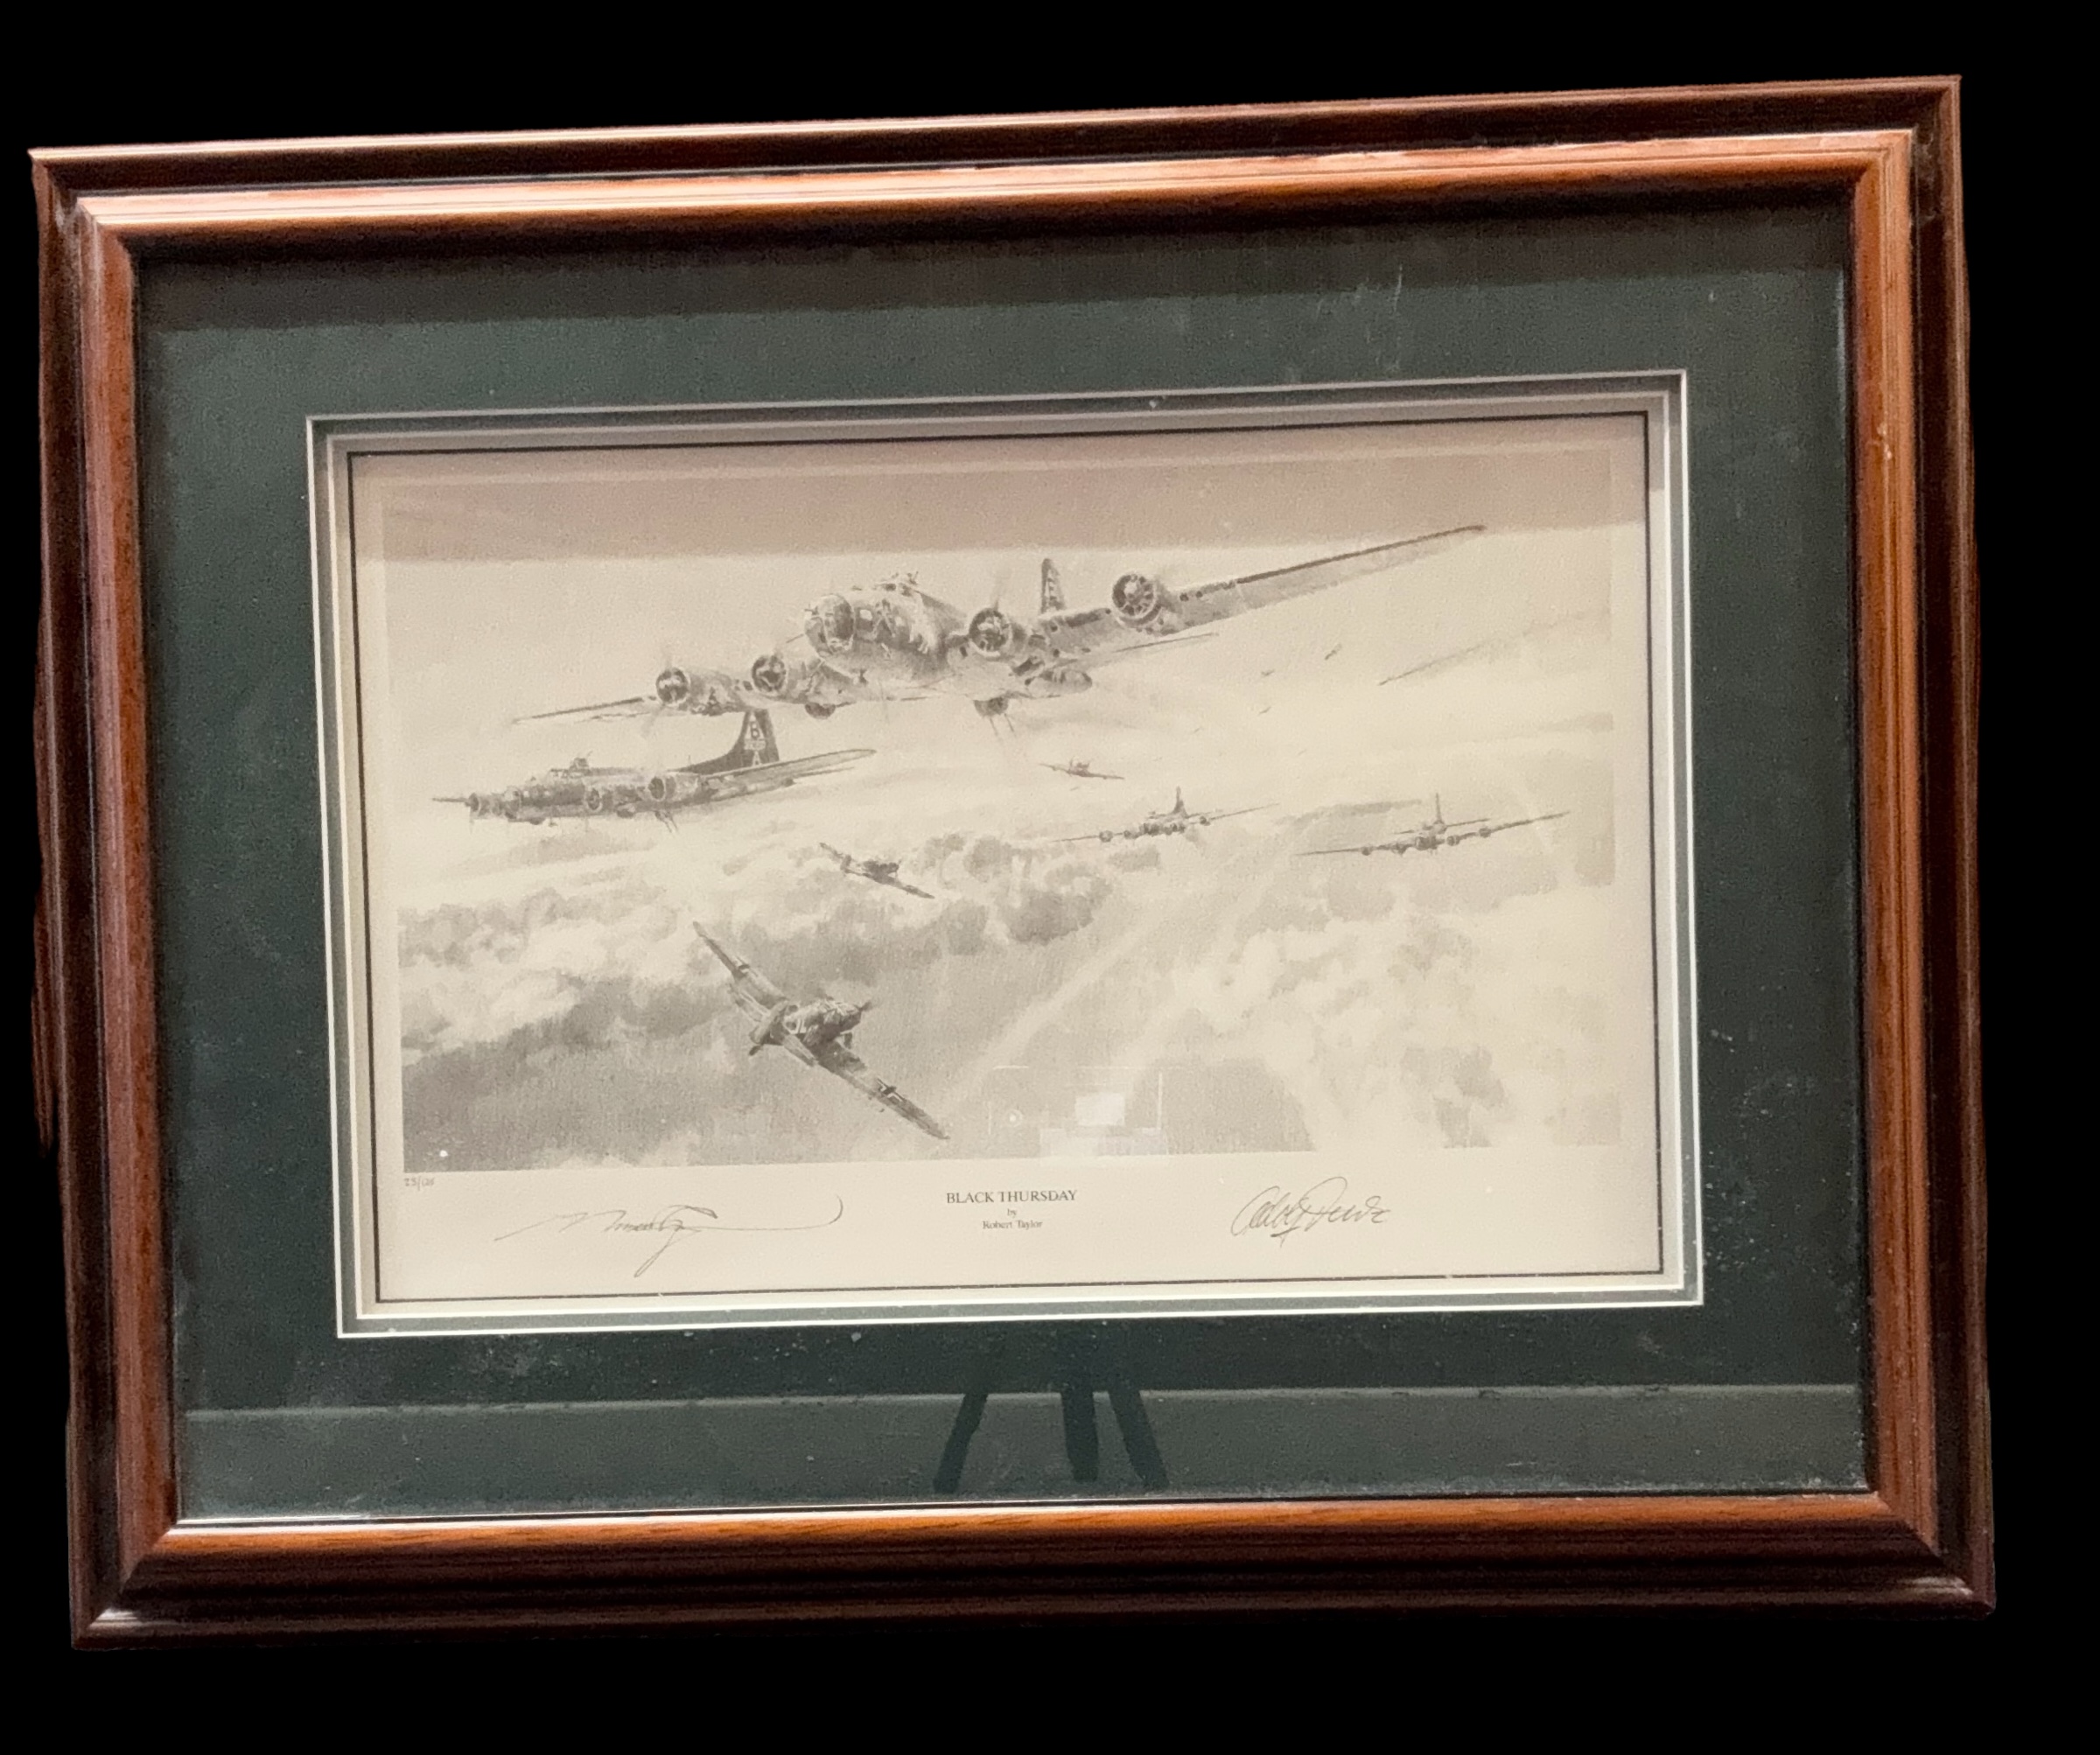 Black Thursday WWII signed 26x20 inch framed and mounted pencil print signatures include artist